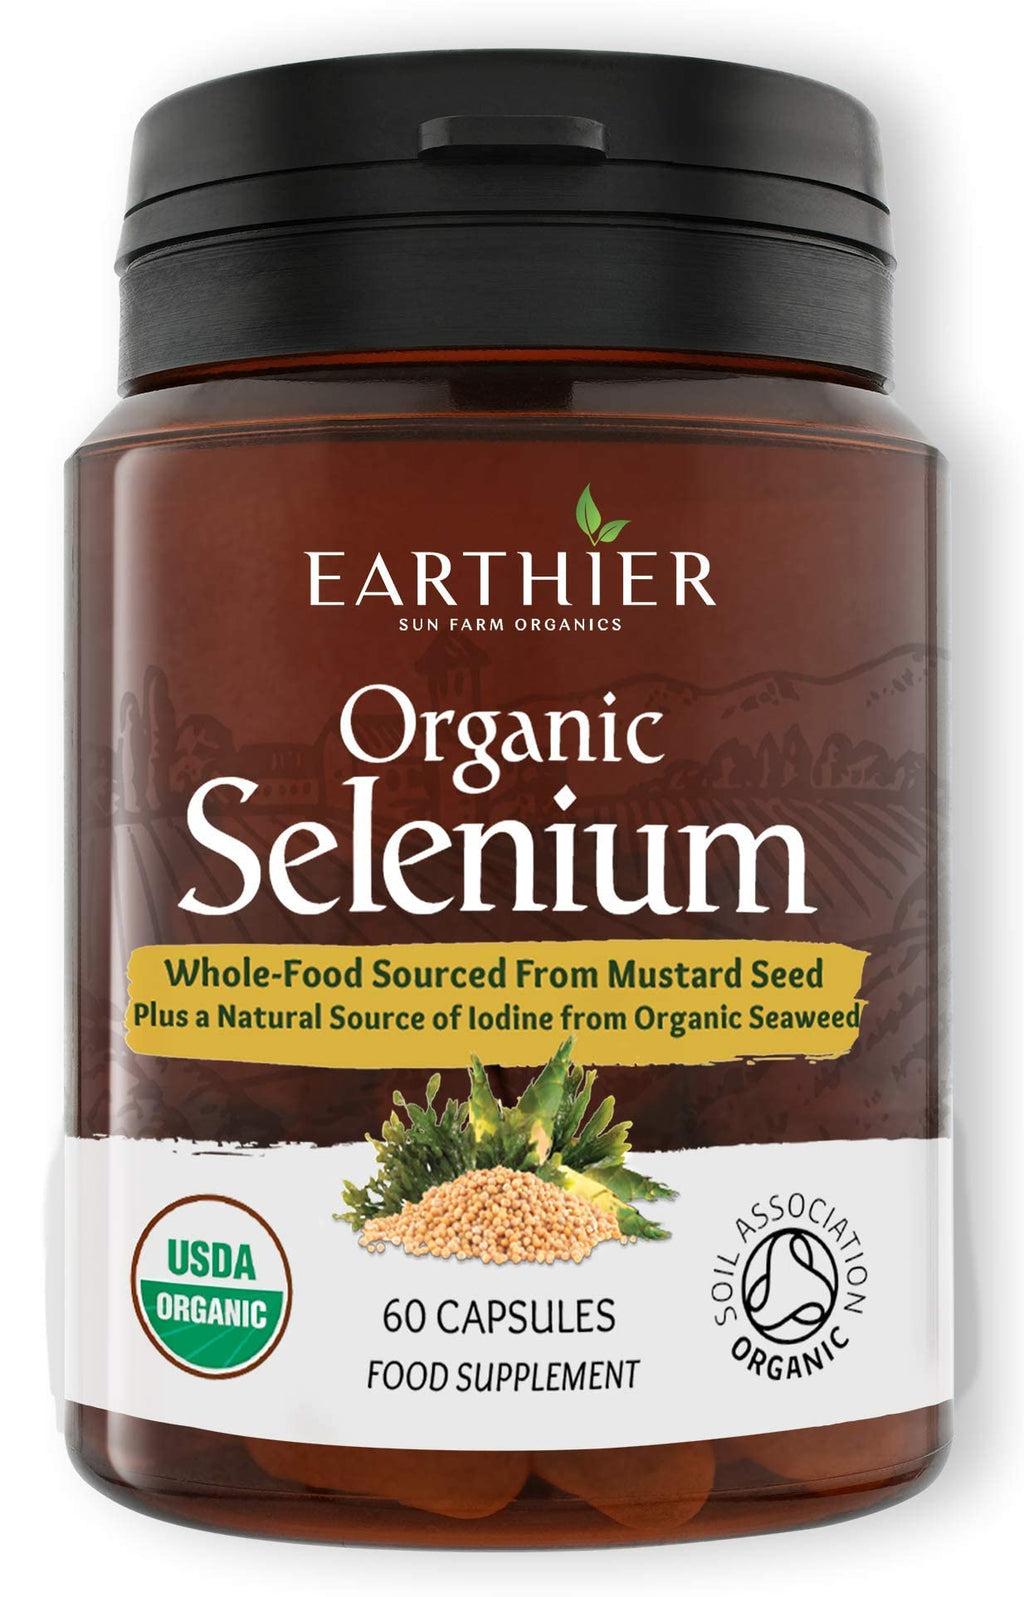 Organic Selenium 200mcg Plus Iodine and Silica - Selenium contributes to Normal Thyroid and Immune Function � 2 Month Supply - Whole Food Supplement - Certified Organic by Soil Association - BeesActive Australia